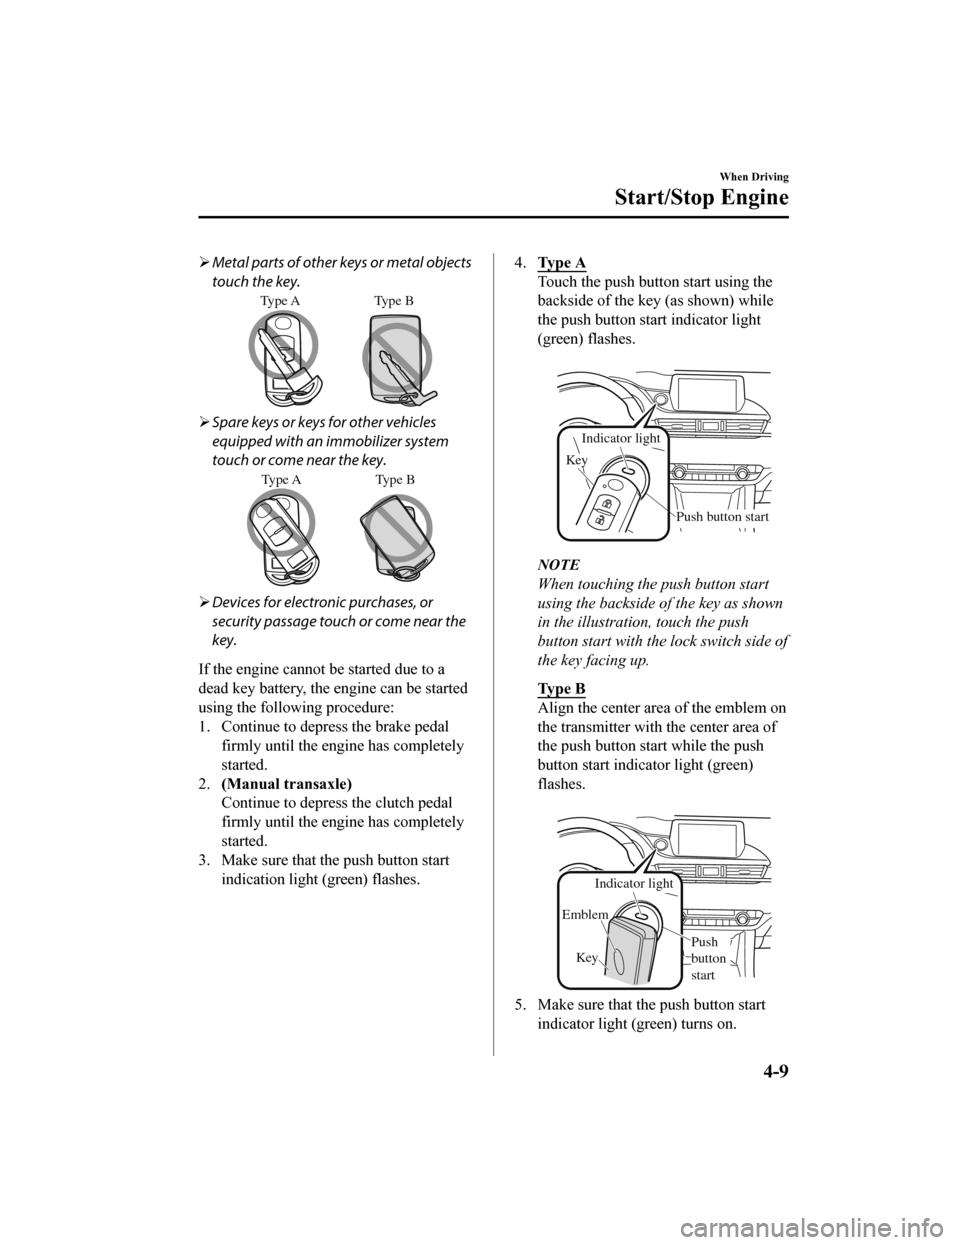 MAZDA MODEL 6 2020  Owners Manual (in English) Metal parts of other keys or metal objects
touch the key.
Type A Type  B
Spare keys or keys for other vehicles
equipped with an immobilizer system
touch or come near the key.
Type A Type  B
D